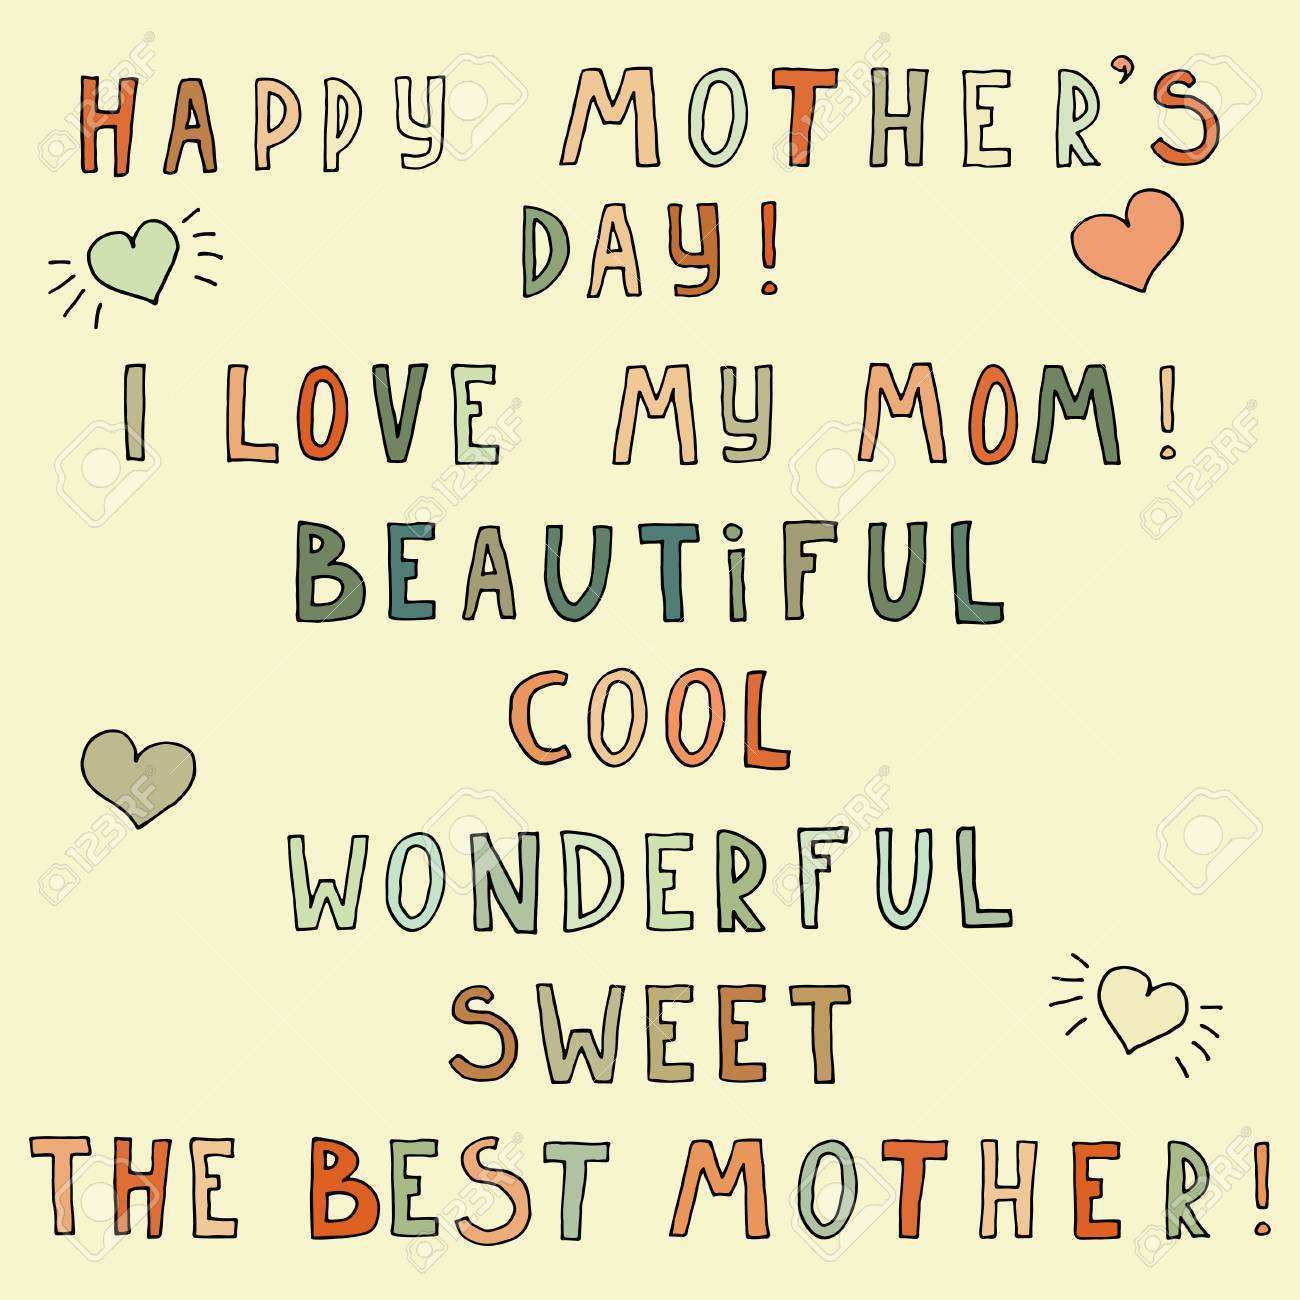 93 Standard Homemade Mother S Day Card Templates in Photoshop for Homemade Mother S Day Card Templates